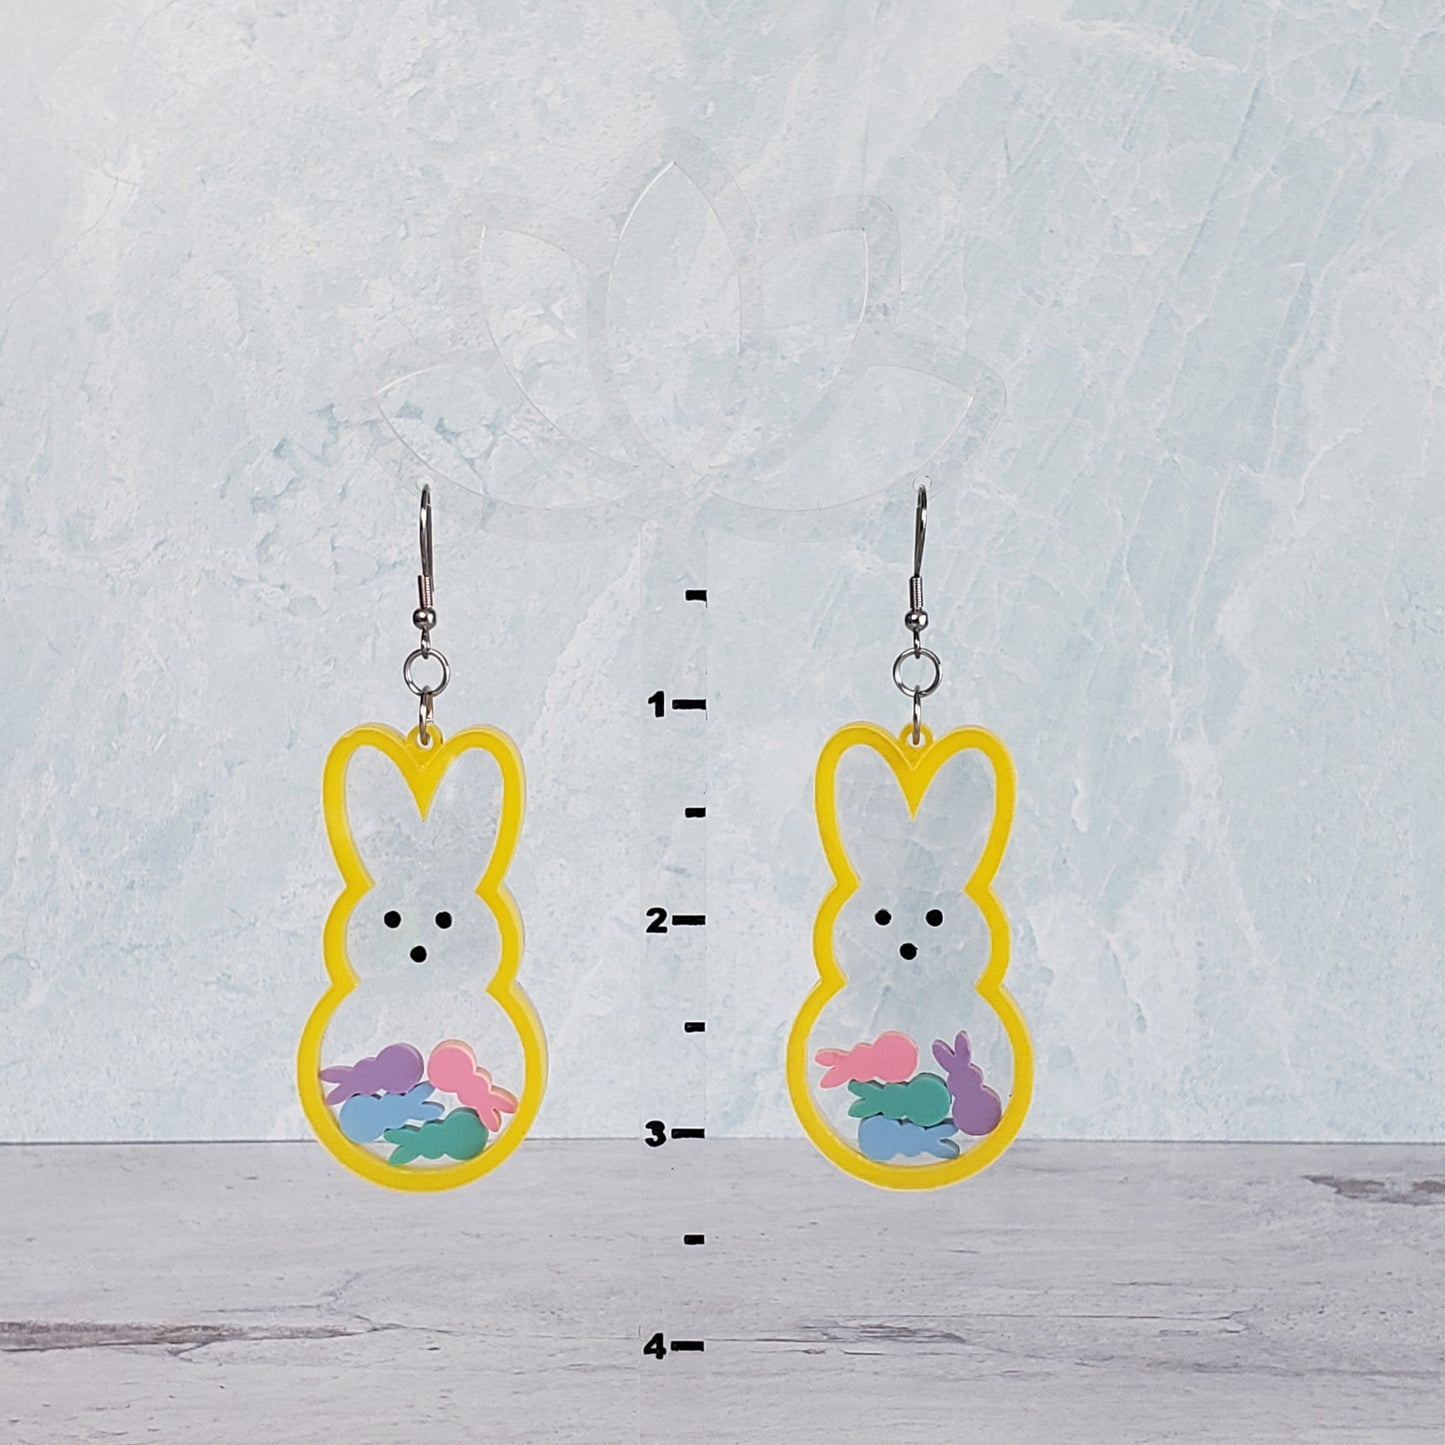 Marshmallow bunny shaker earrings in yellow with pastel bunnies inside on stainless steel earring wires on hanging display for size.